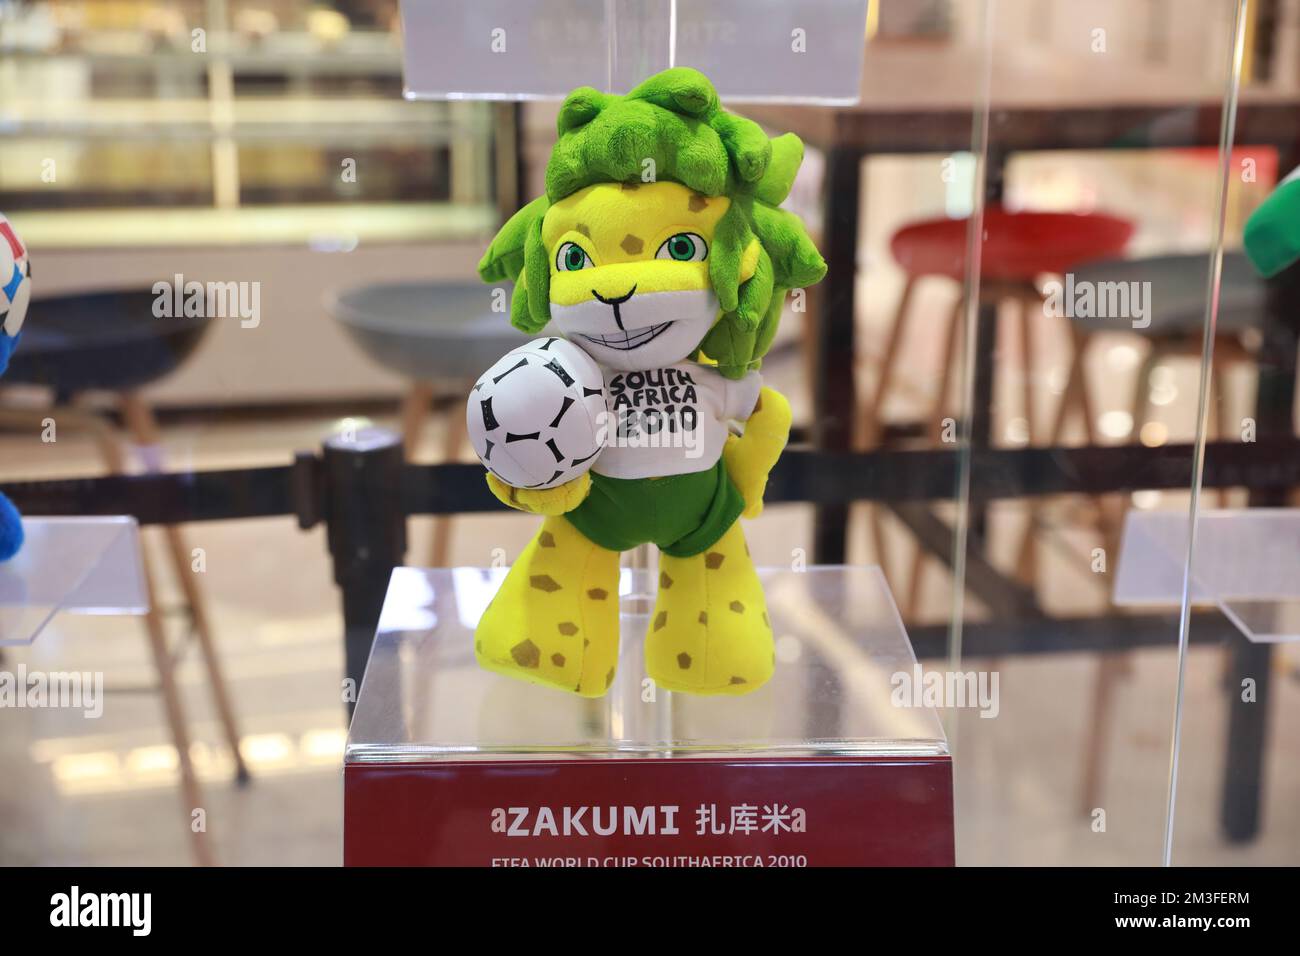 XI'AN, CHINA - DECEMBER 14, 2022 - Zakumi, the mascot of the 2010 World Cup South Africa, is displayed at a shopping mall in Xi 'an, Shaanxi province, Stock Photo